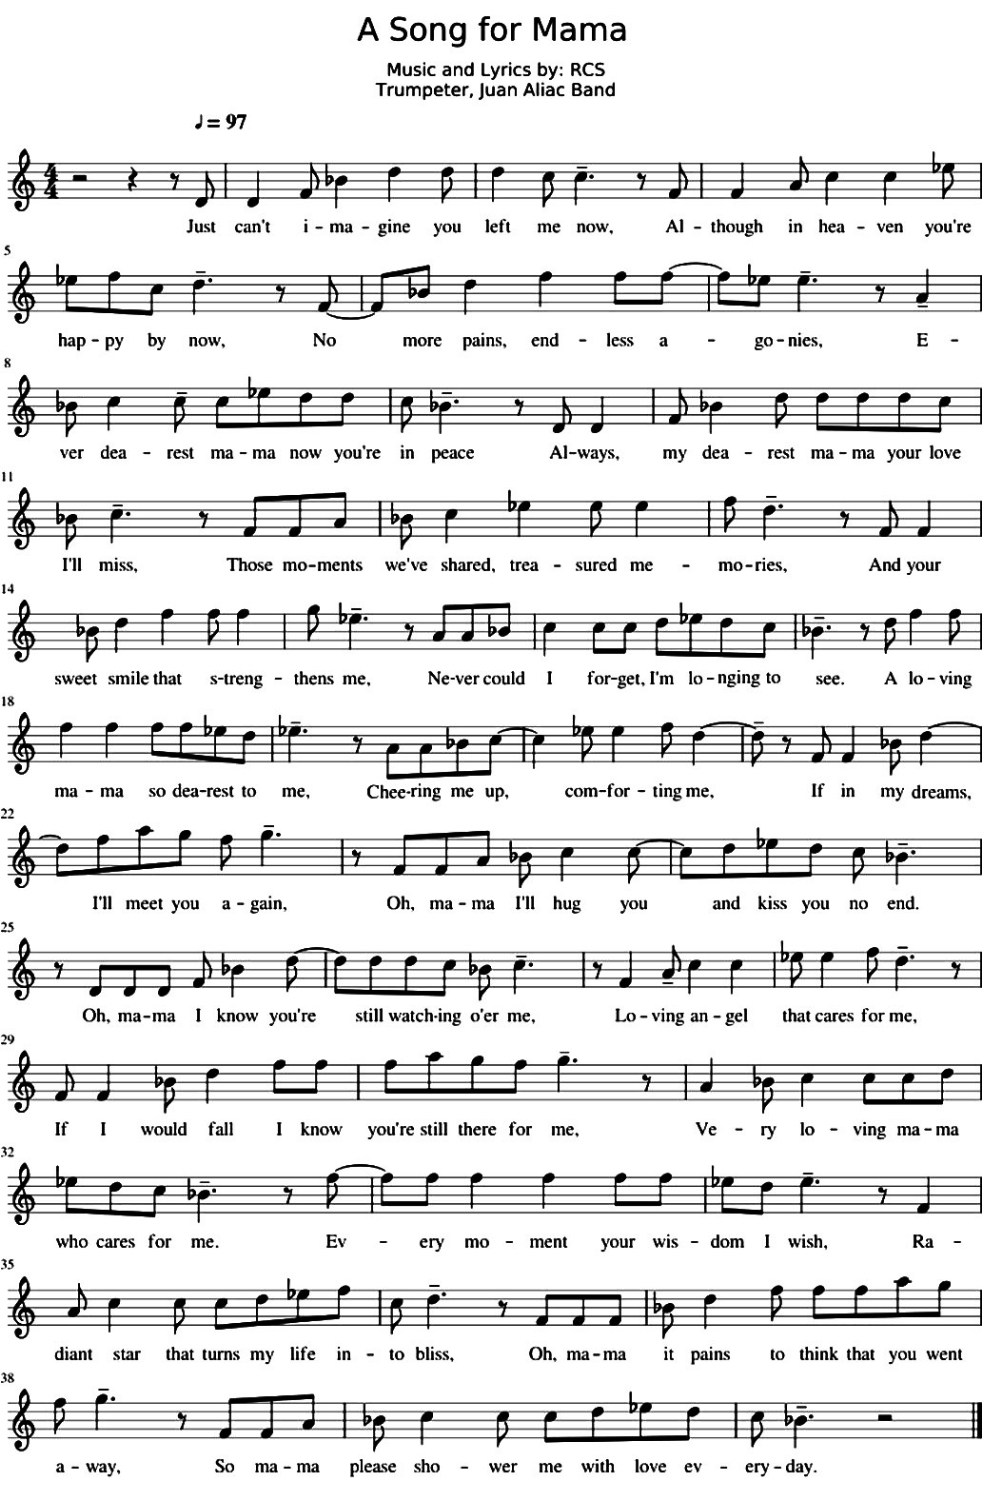 A song for mama sheet music notes